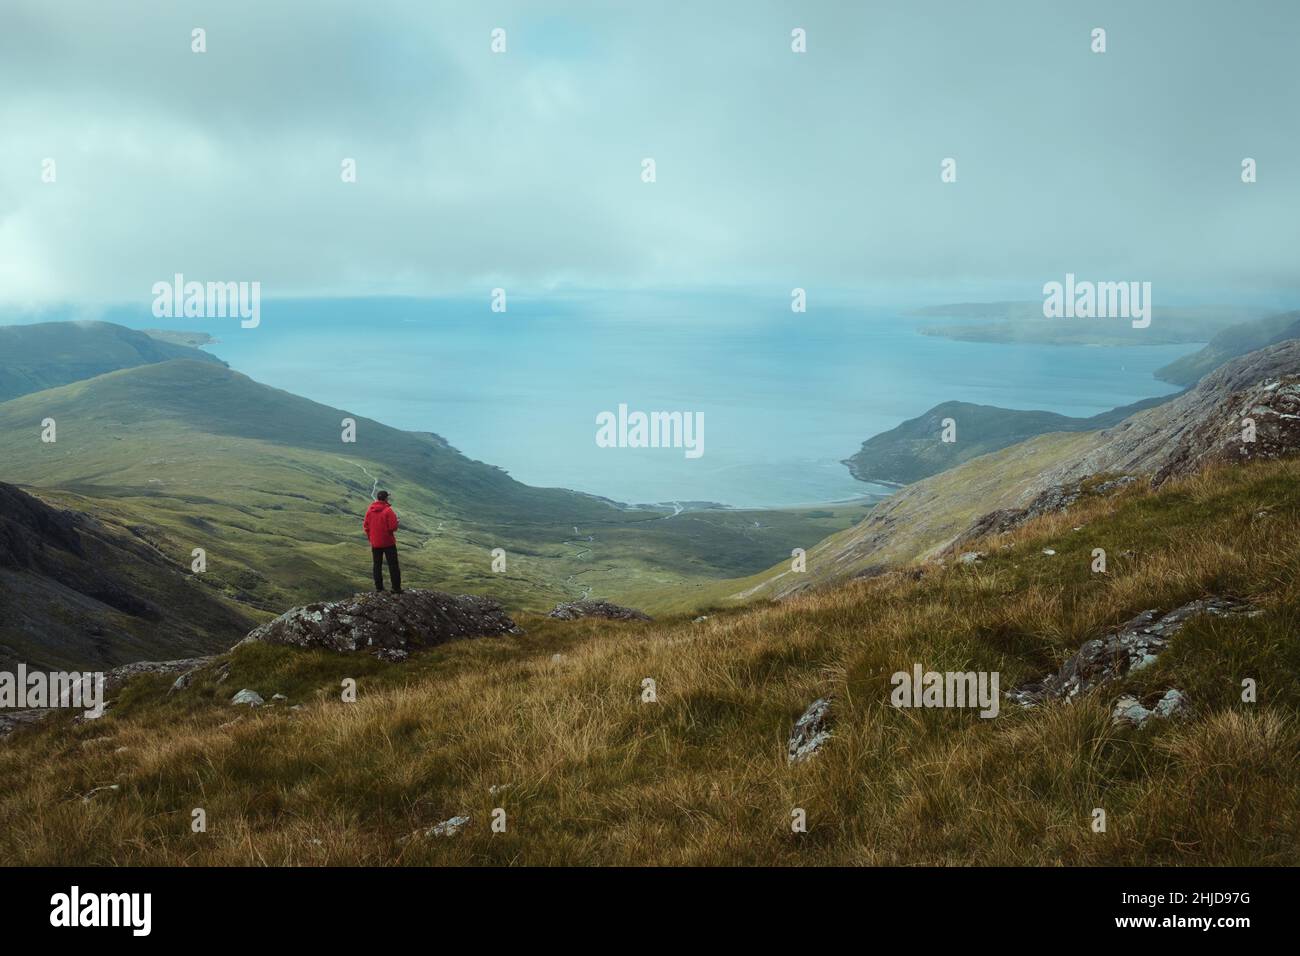 A hiker at the top of the mountain views the magnificent landscape of the sea bay. Isle of Skye. Bla Bheinn, Isle of Skye, Scotland  Stock Photo